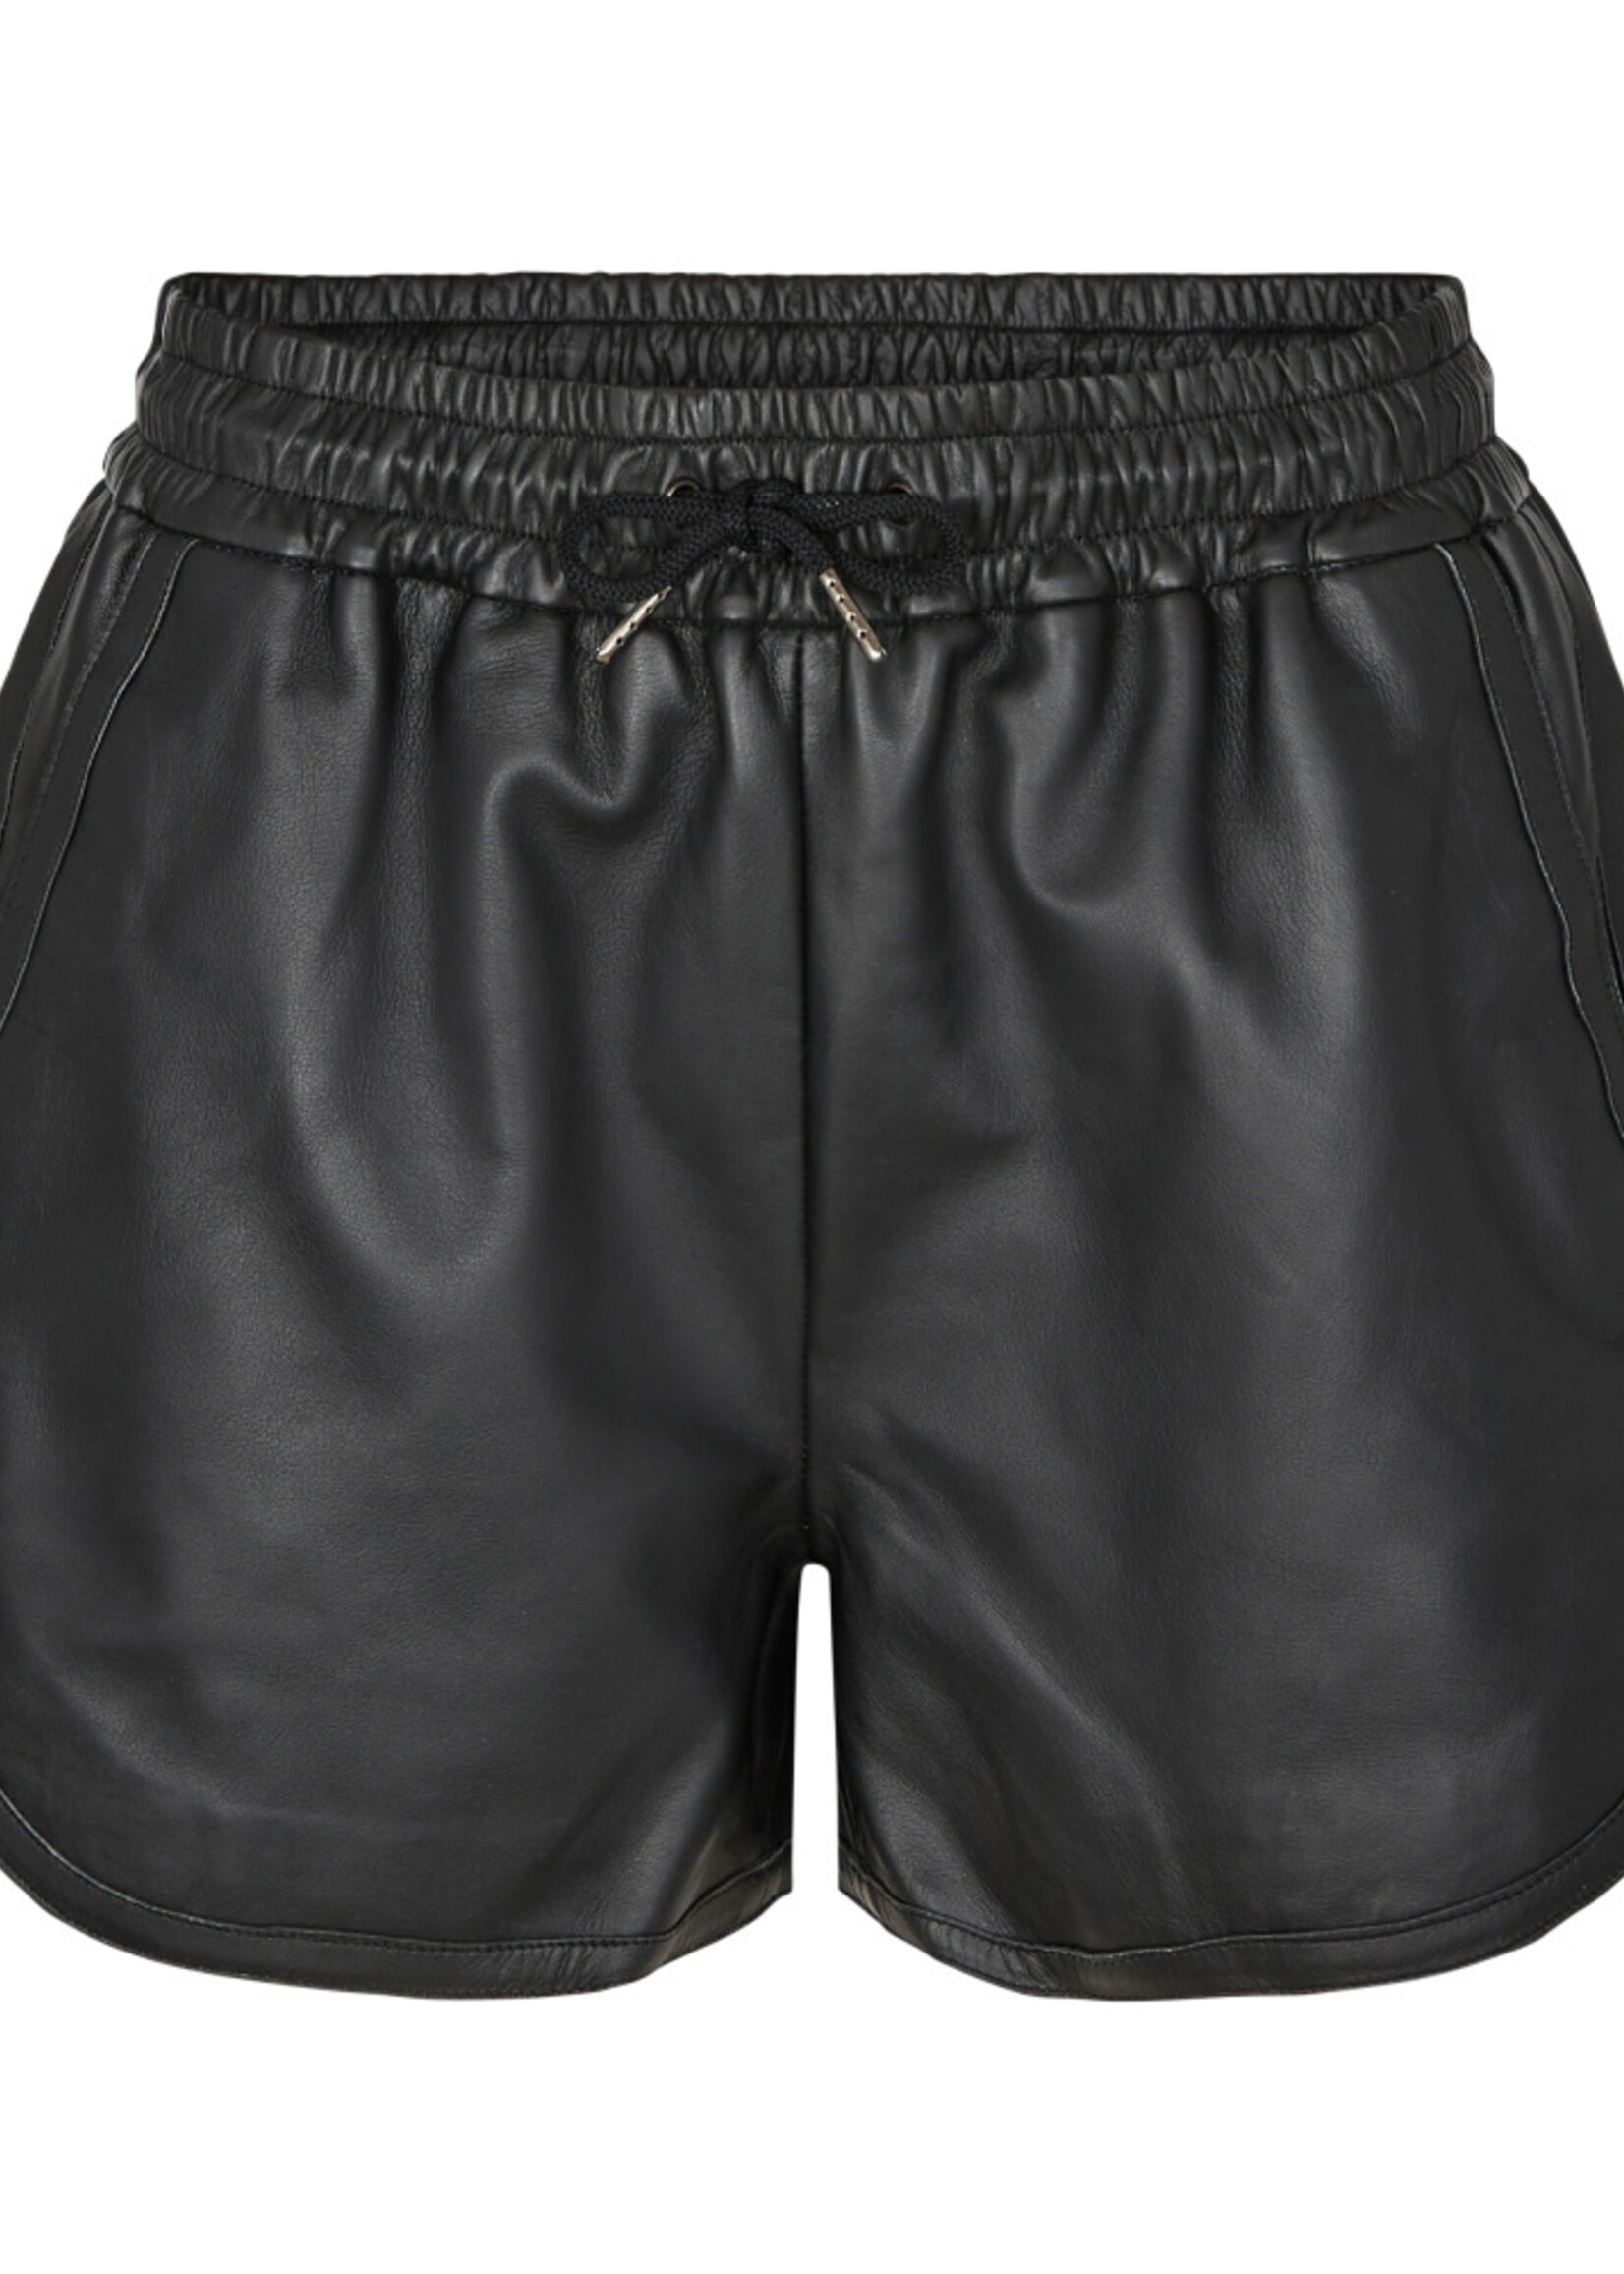 Co'Couture Phoebe Leather Crop Shorts - Black